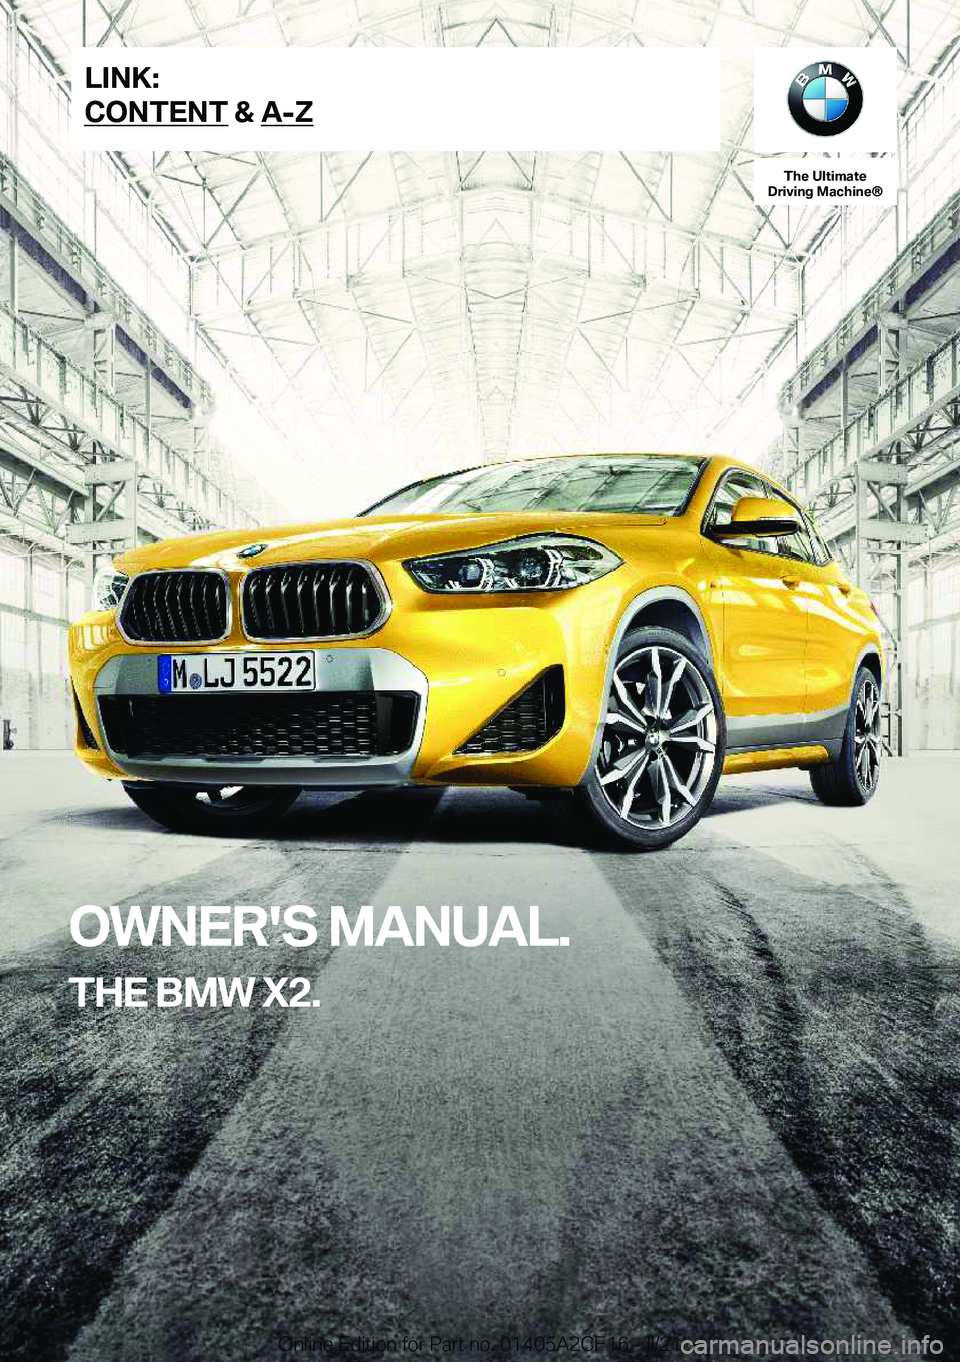 BMW X2 2022  Owners Manual �T�h�e��U�l�t�i�m�a�t�e
�D�r�i�v�i�n�g��M�a�c�h�i�n�e�n
�O�W�N�E�R�'�S��M�A�N�U�A�L�.
�T�H�E��B�M�W��X�2�.�L�I�N�K�:
�C�O�N�T�E�N�T��&��A�-�Z�O�n�l�i�n�e��E�d�i�t�i�o�n��f�o�r��P�a�r�t�